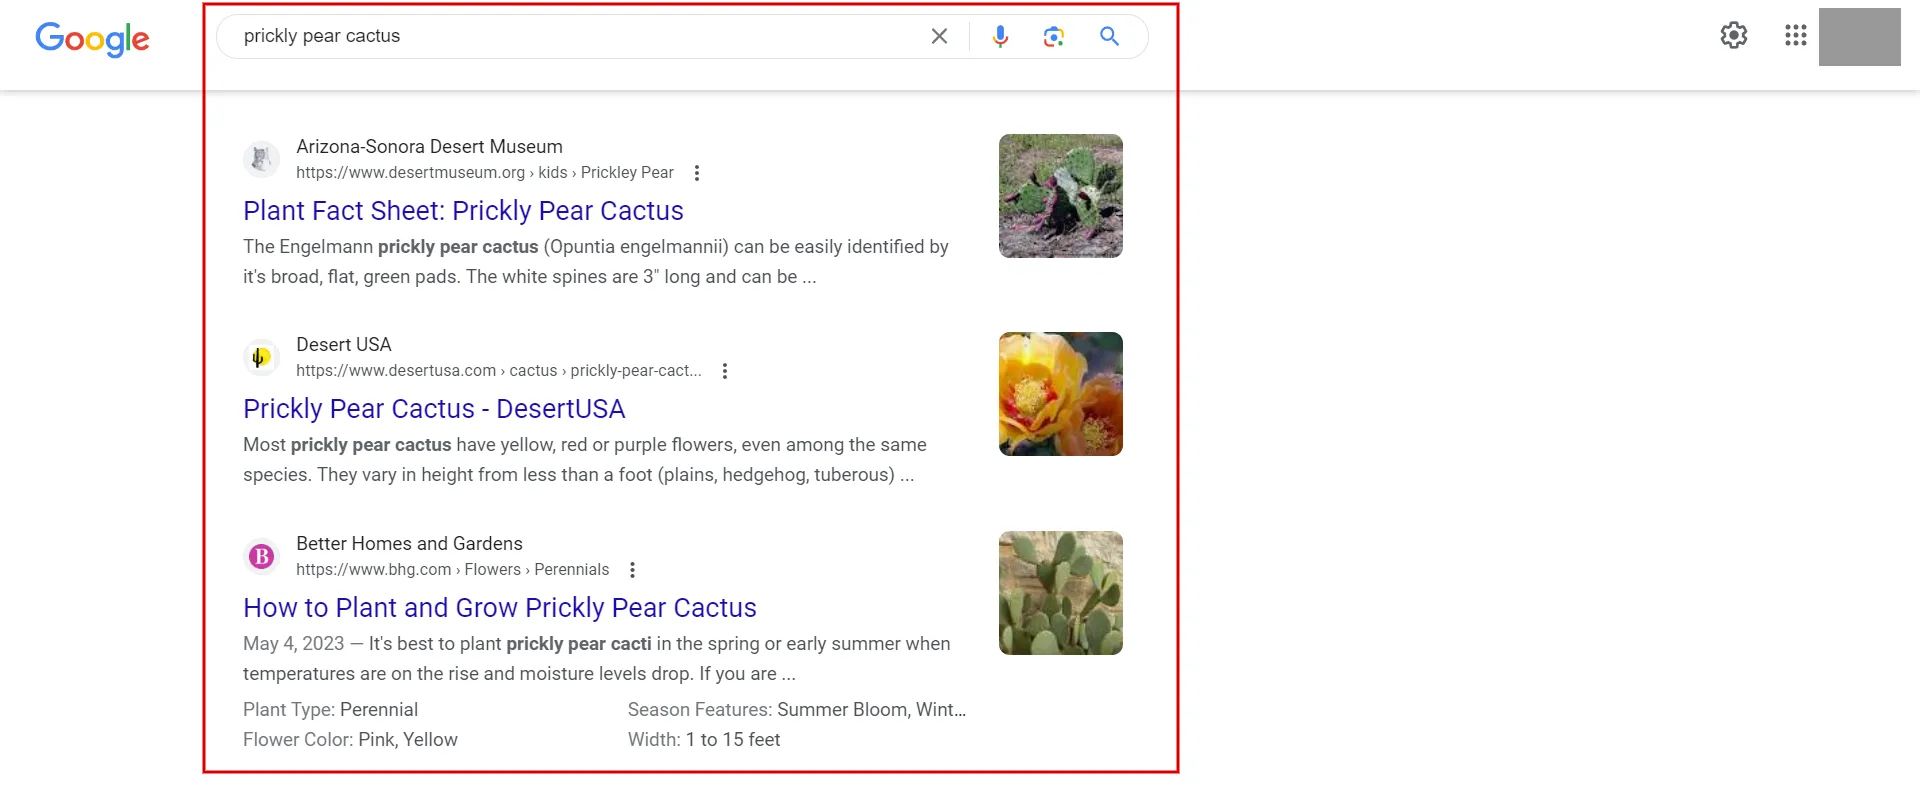 The SERPs related to explanation and care recommendations